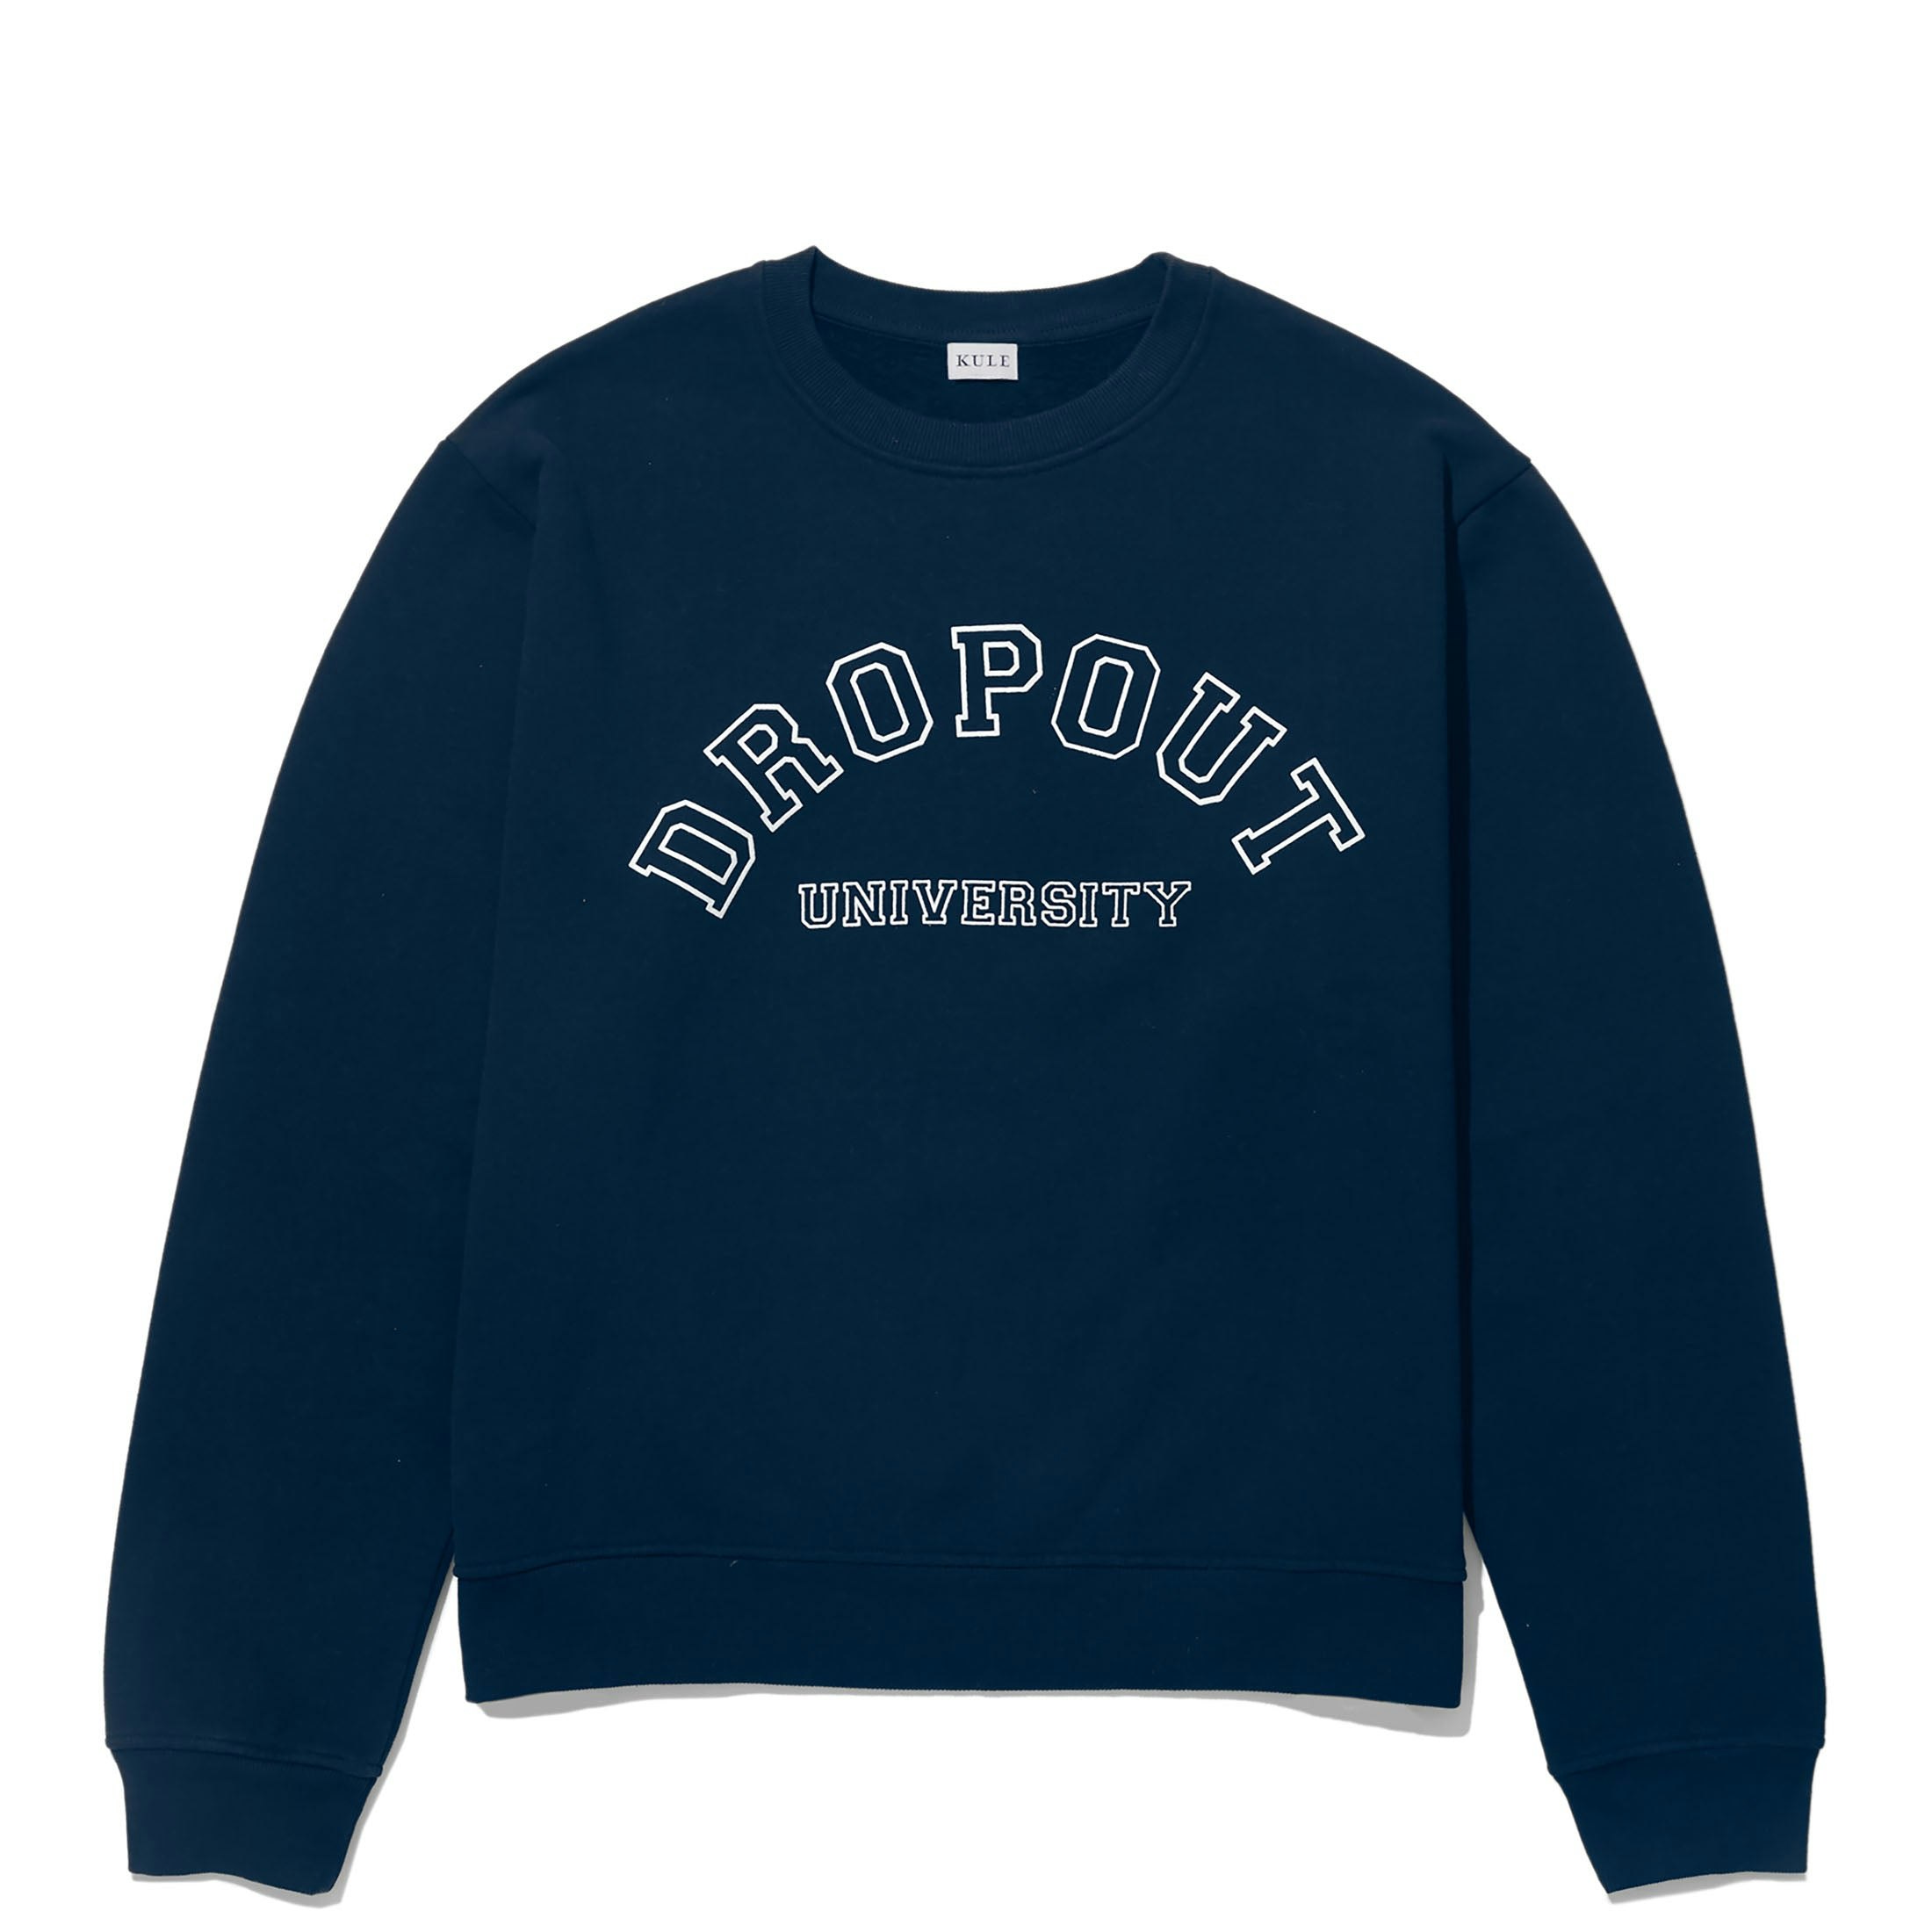 The Oversized Dropout Sweatshirt - Navy - XS / Navy